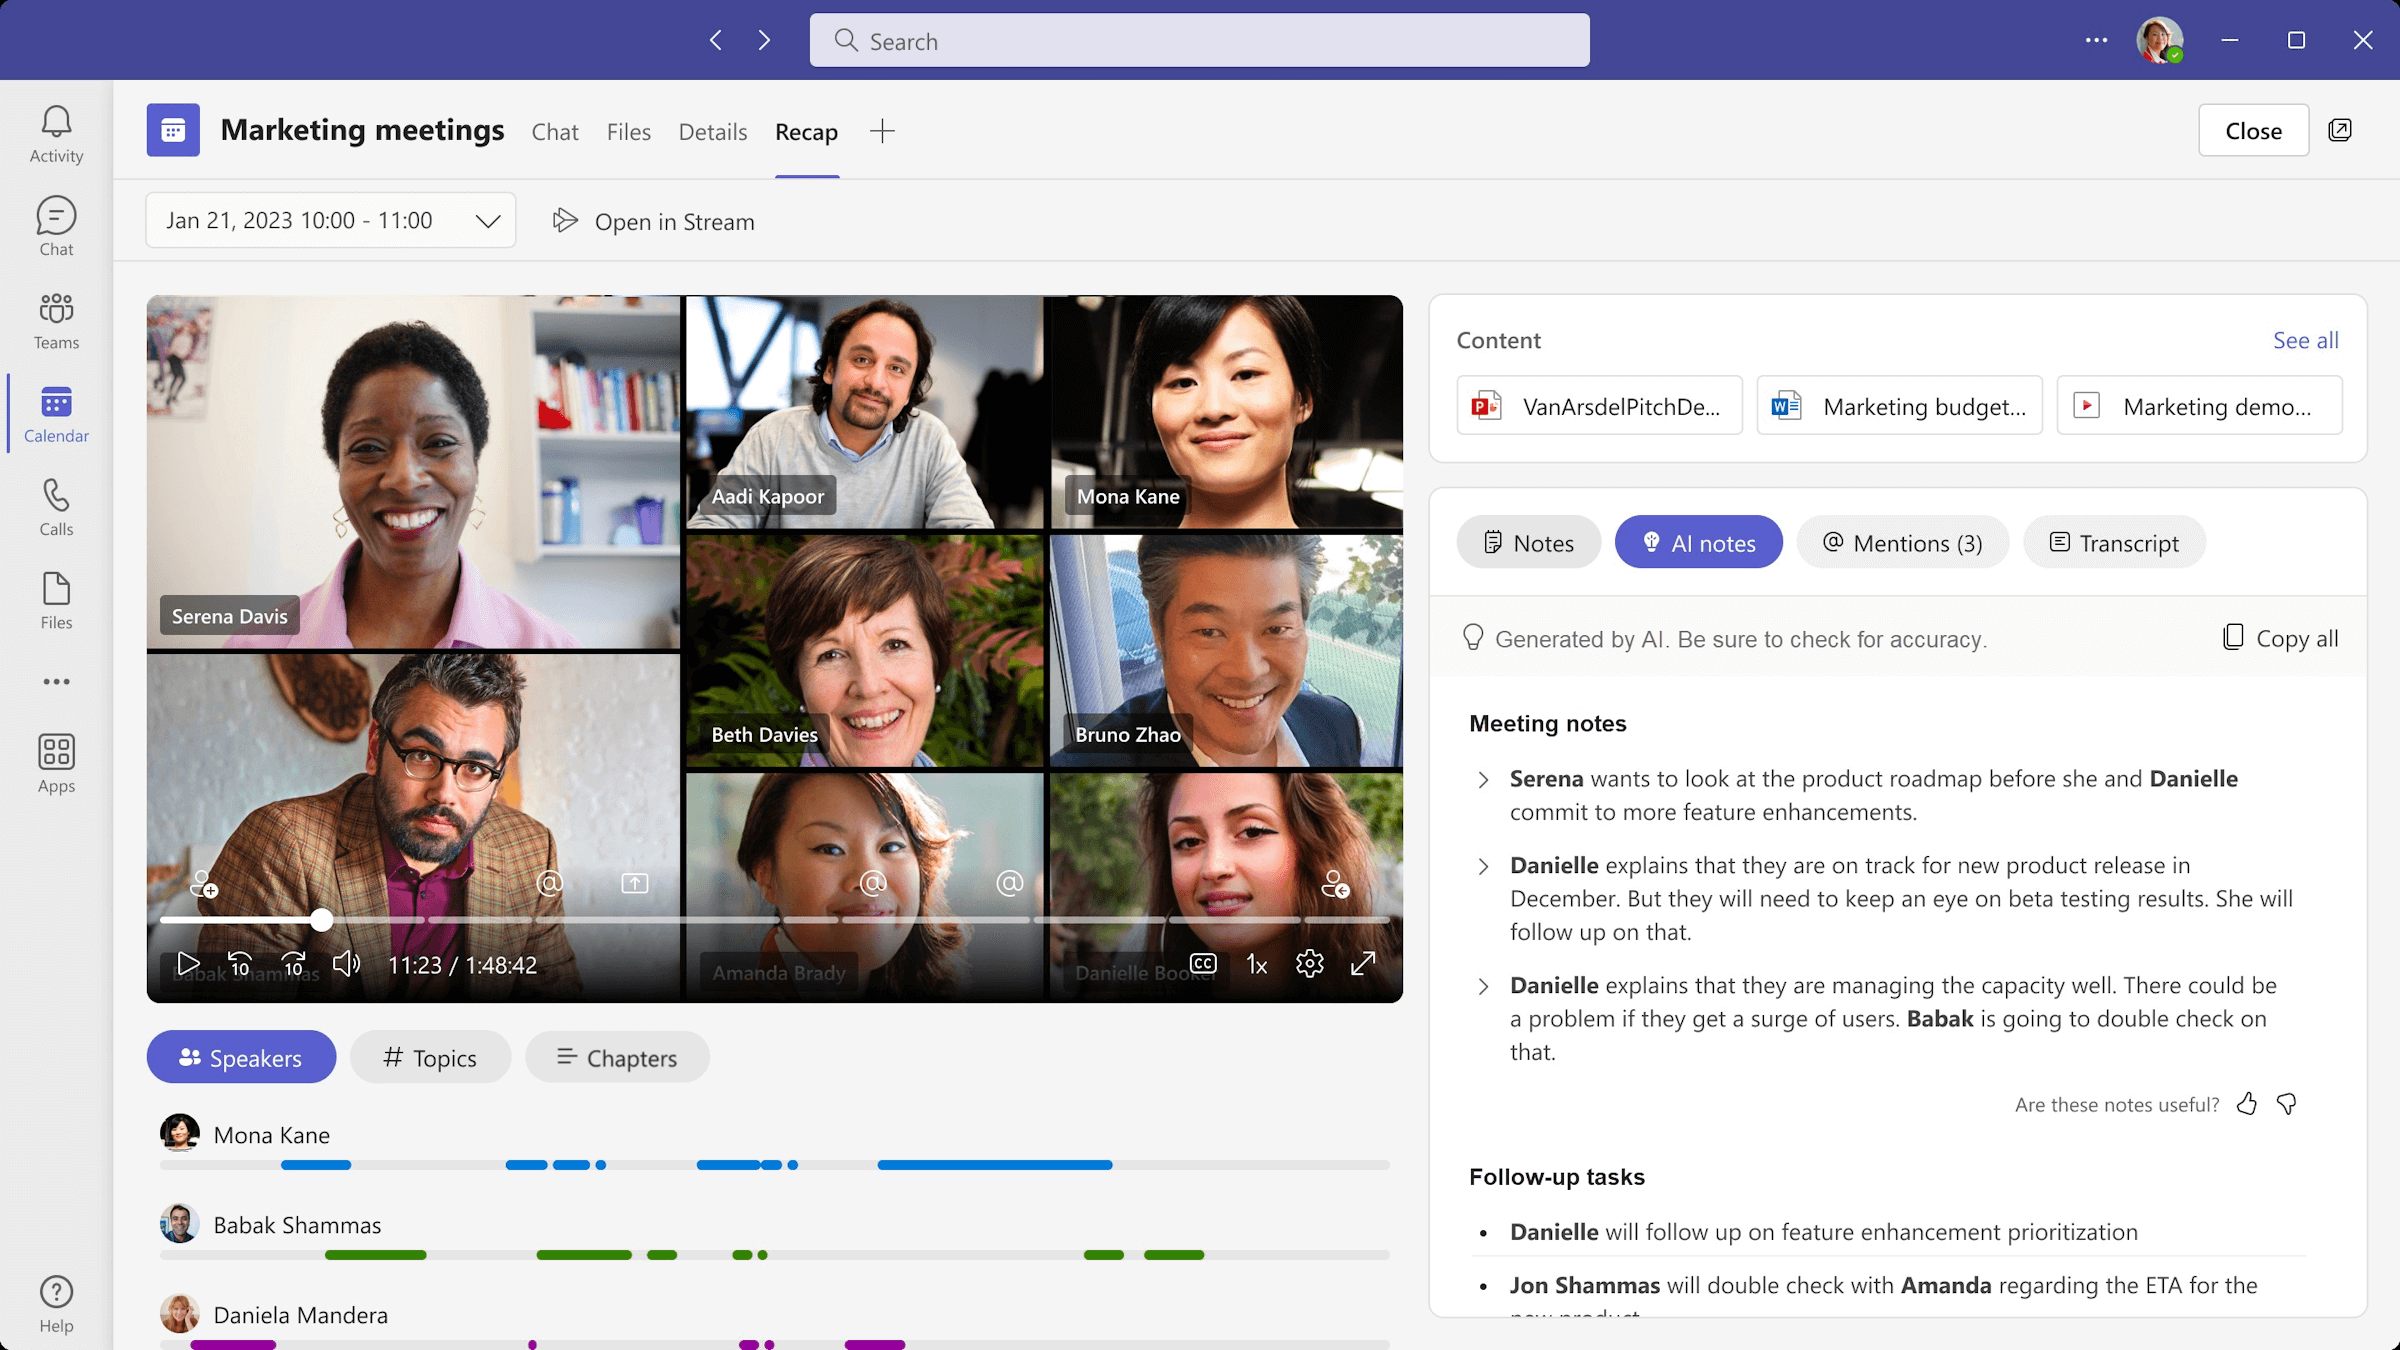 Microsoft Teams uses AI to take notes, assign follow-up tasks and more.